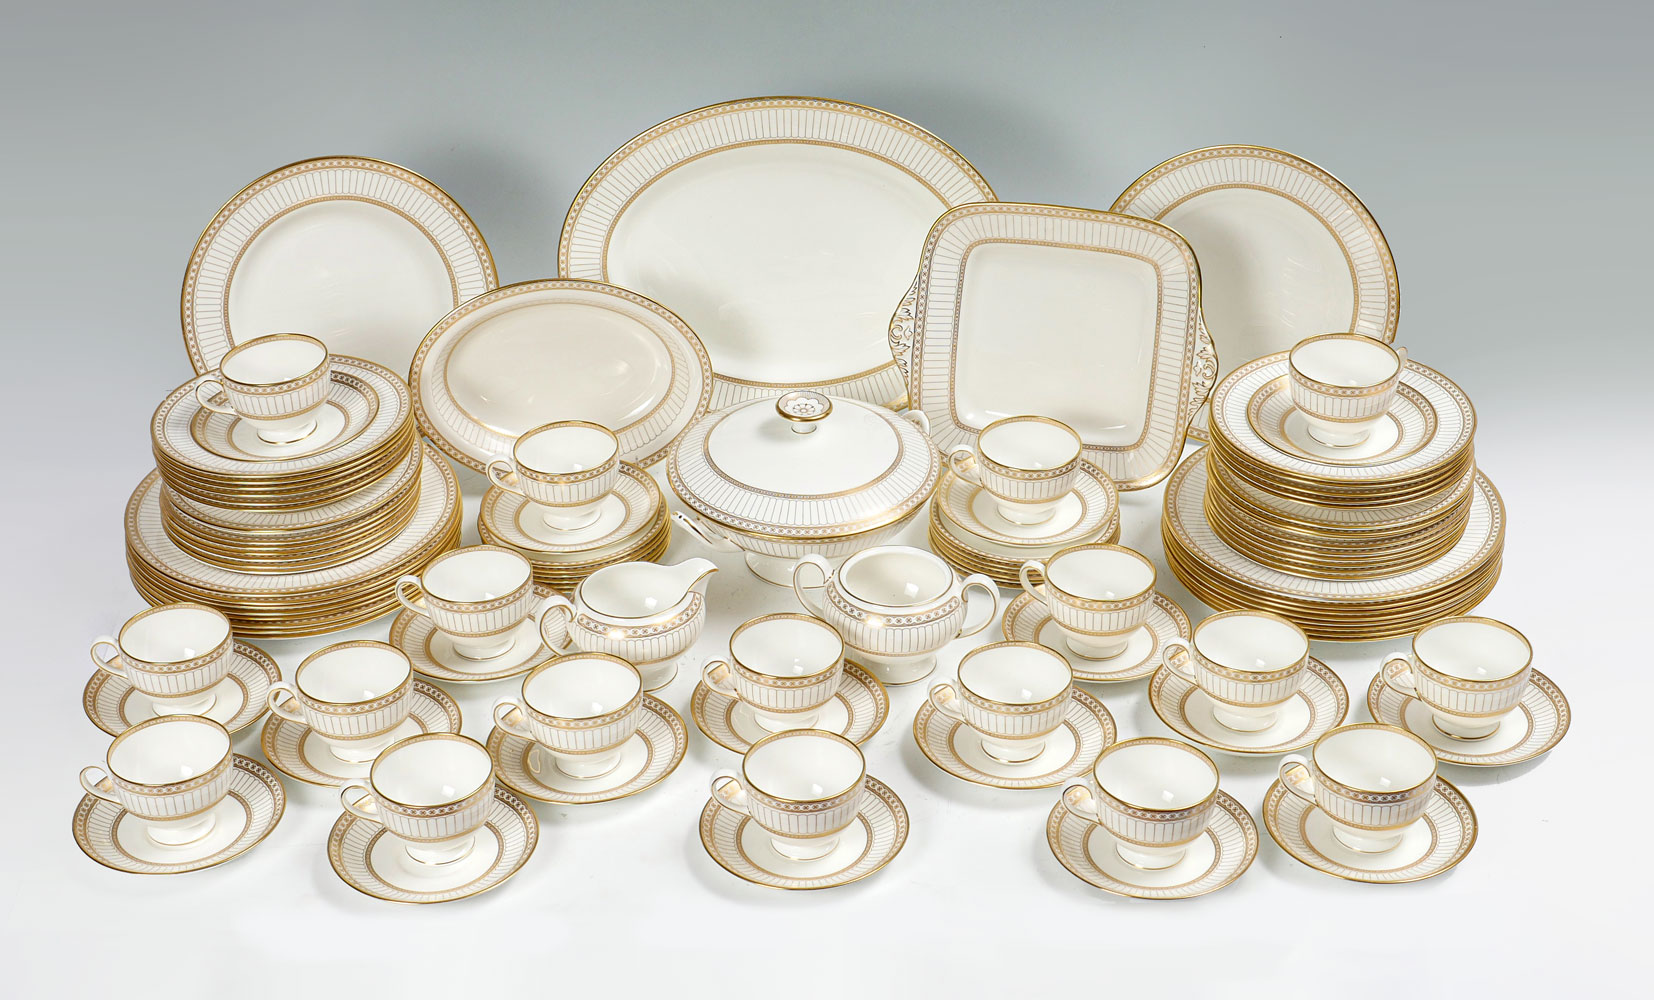 LARGE WEDGWOOD COLONNADE GOLD CHINA 36e80d